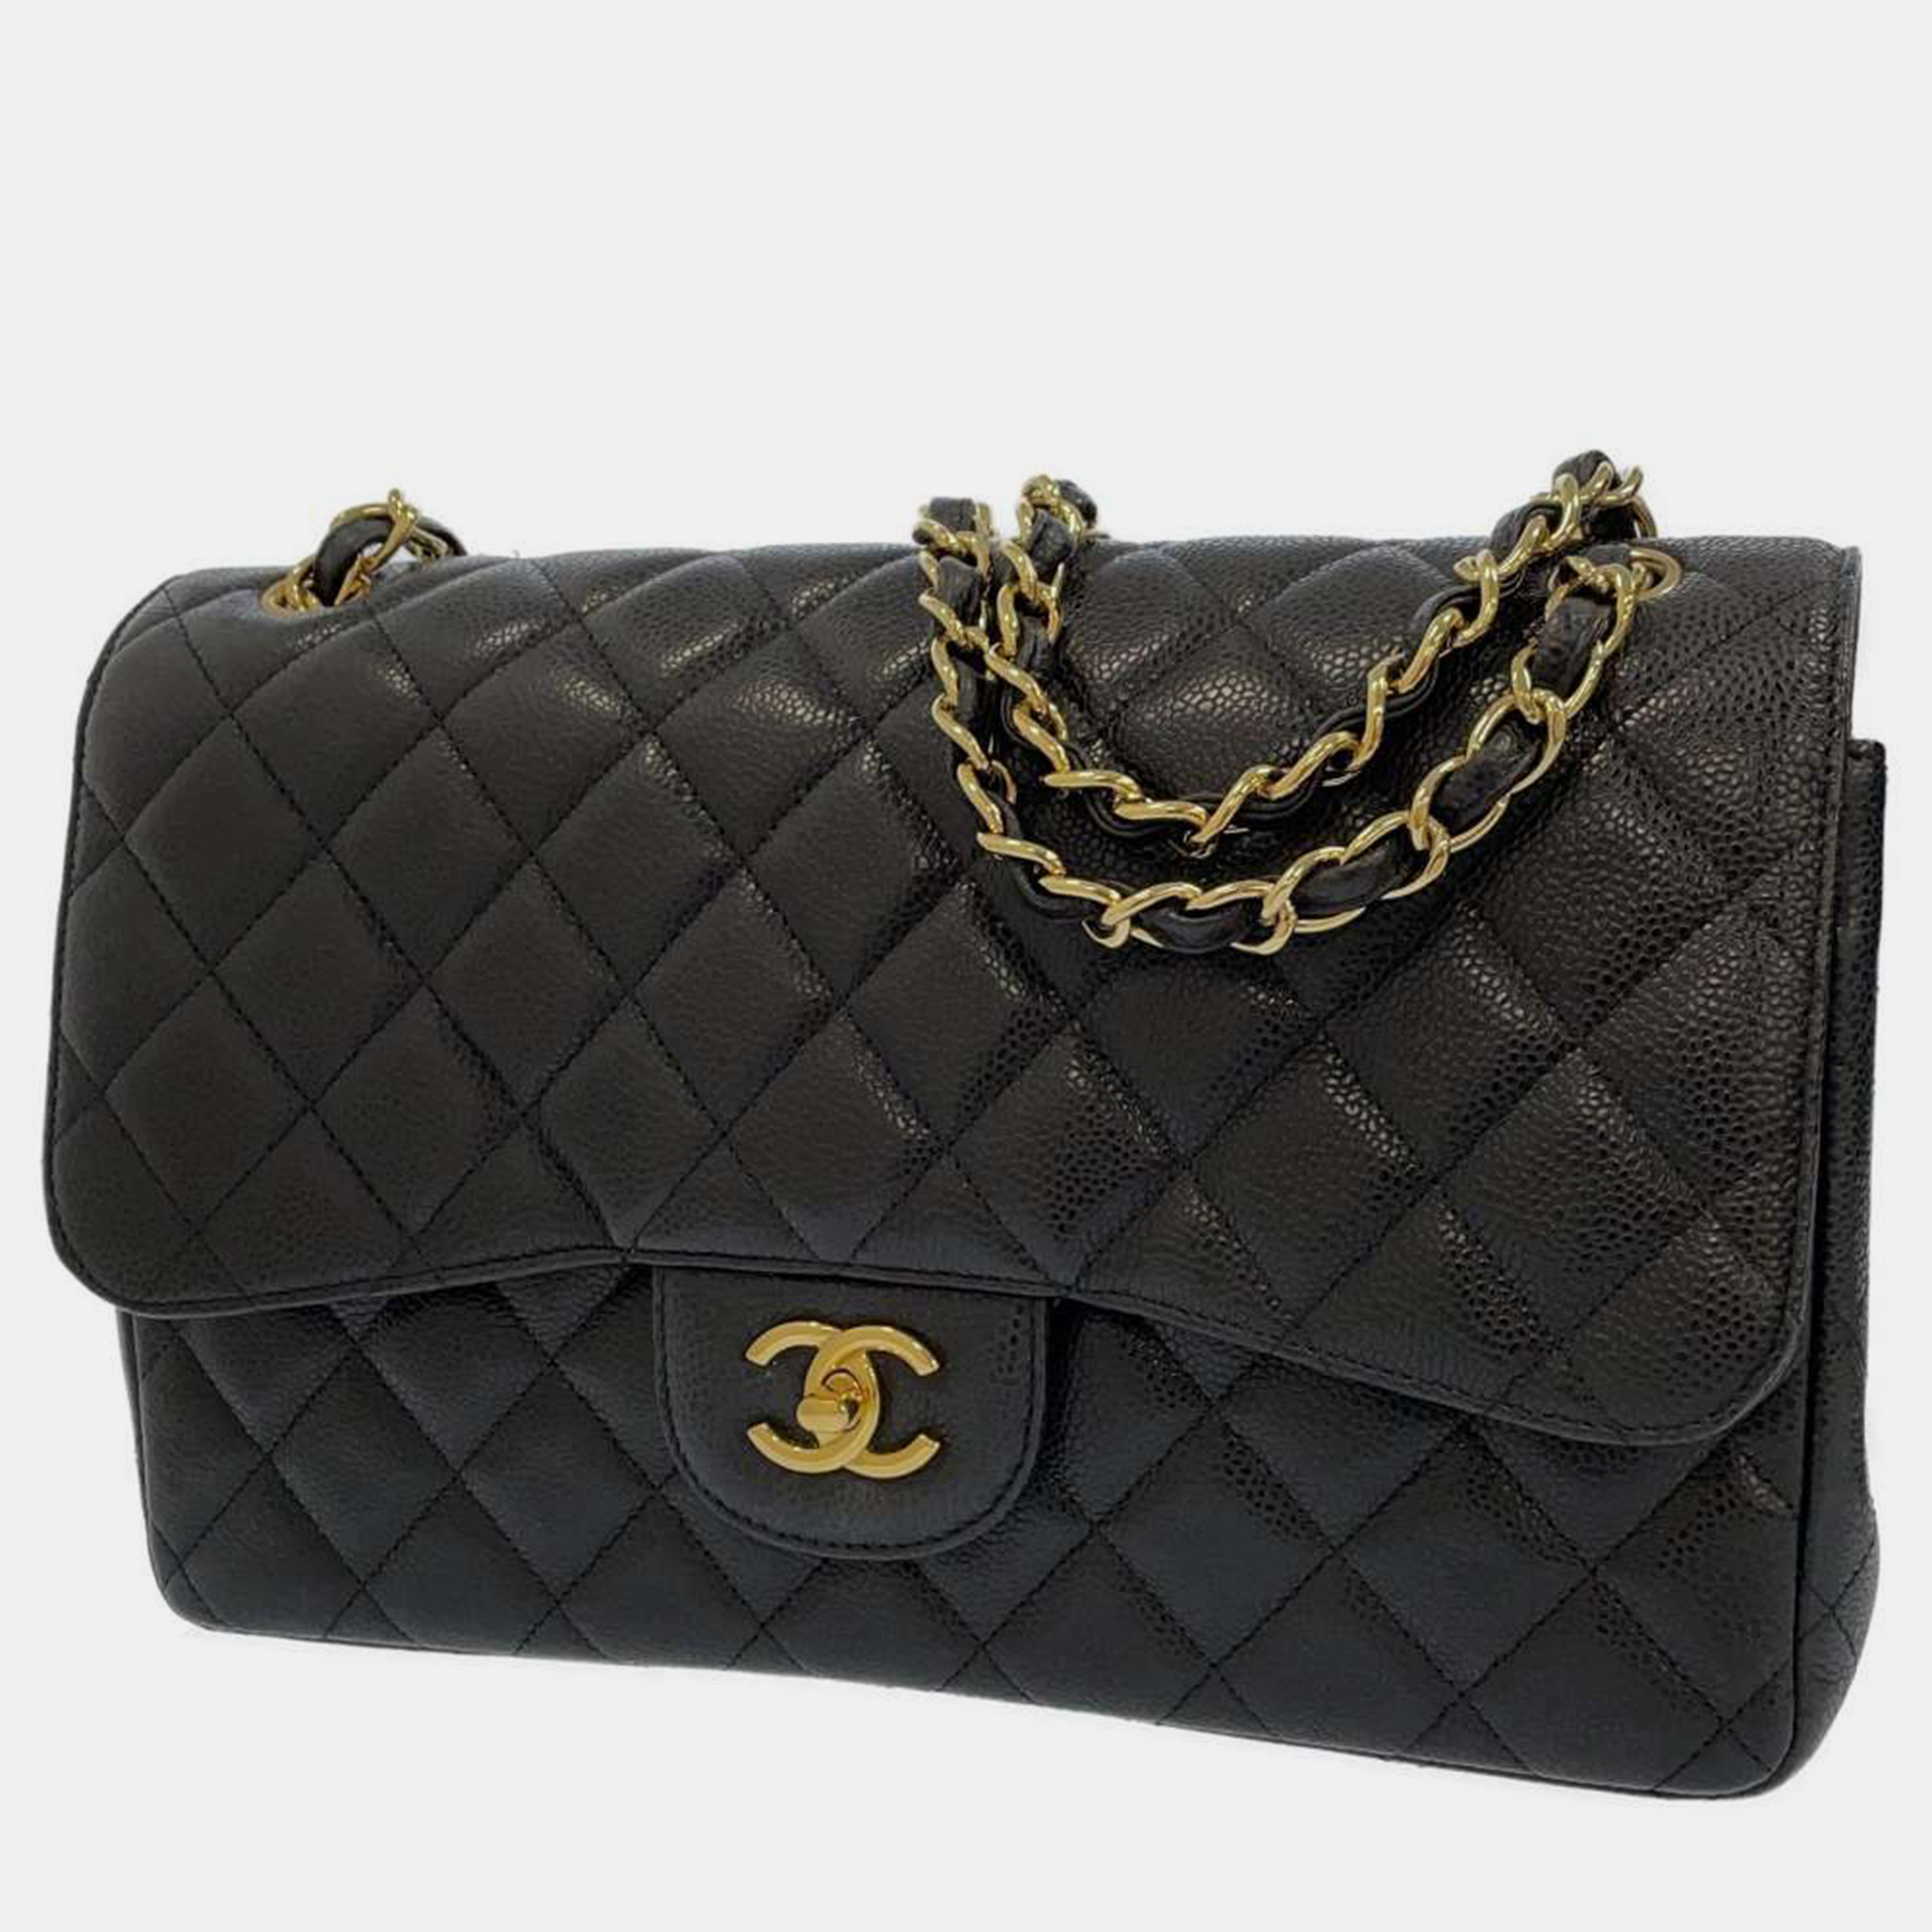 Pre-owned Chanel Black Leather Jumbo Classic Double Flap Bag